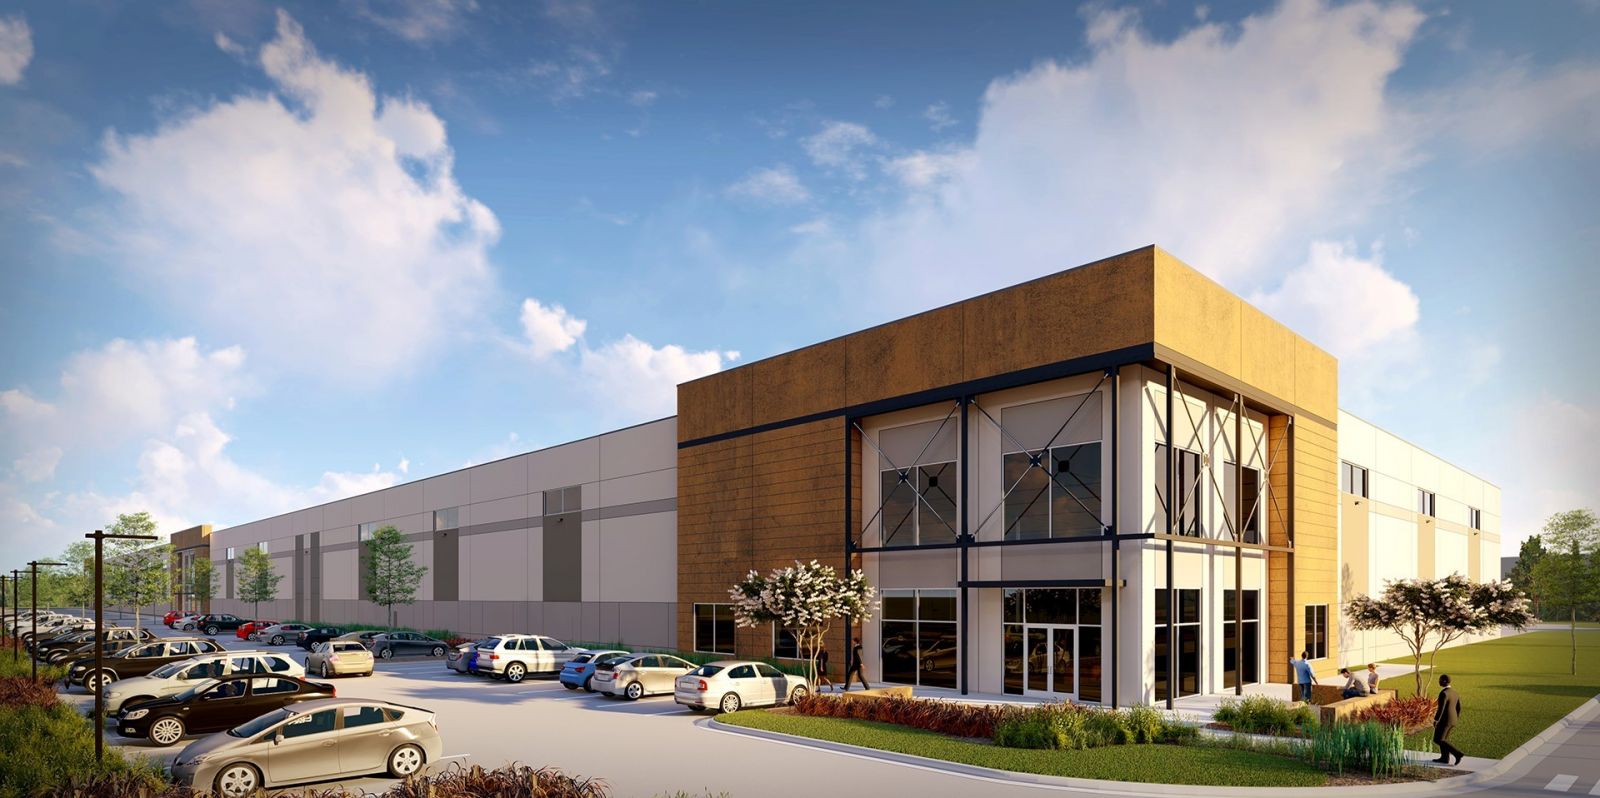 Gissing's Greenville facility will be housing in the Fox Hill Business Park's first industrial building. (Rendering/Provided)